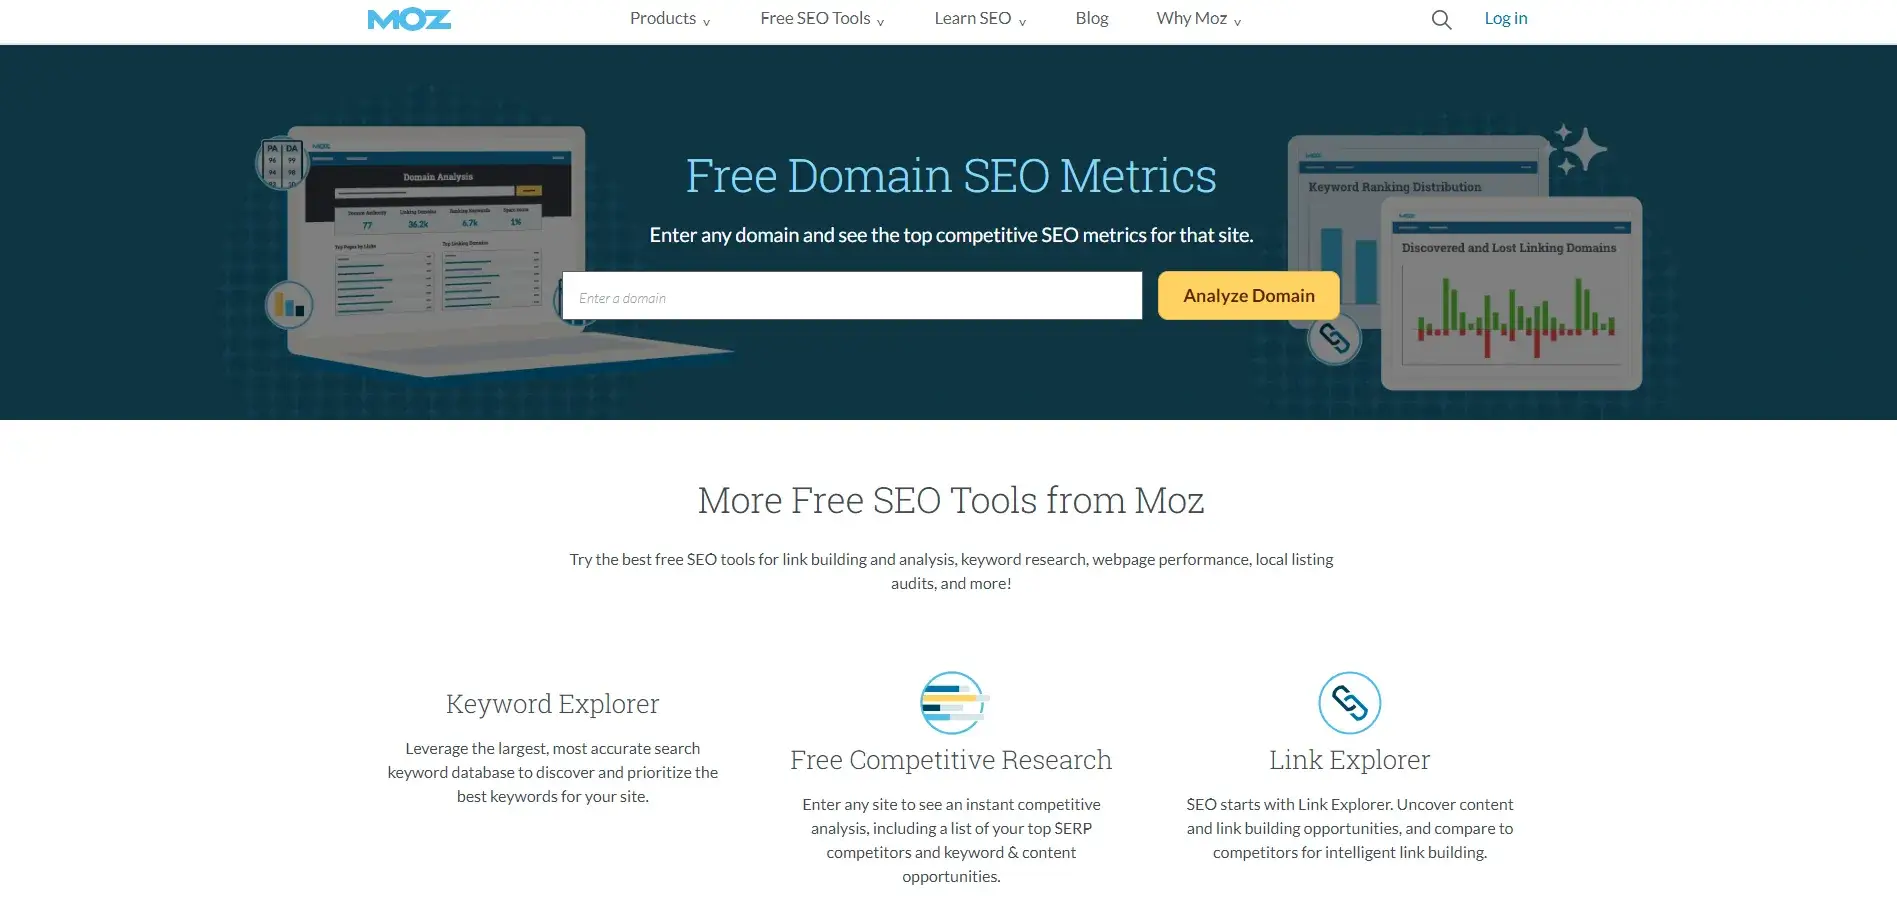 Products to Review: Moz Pro